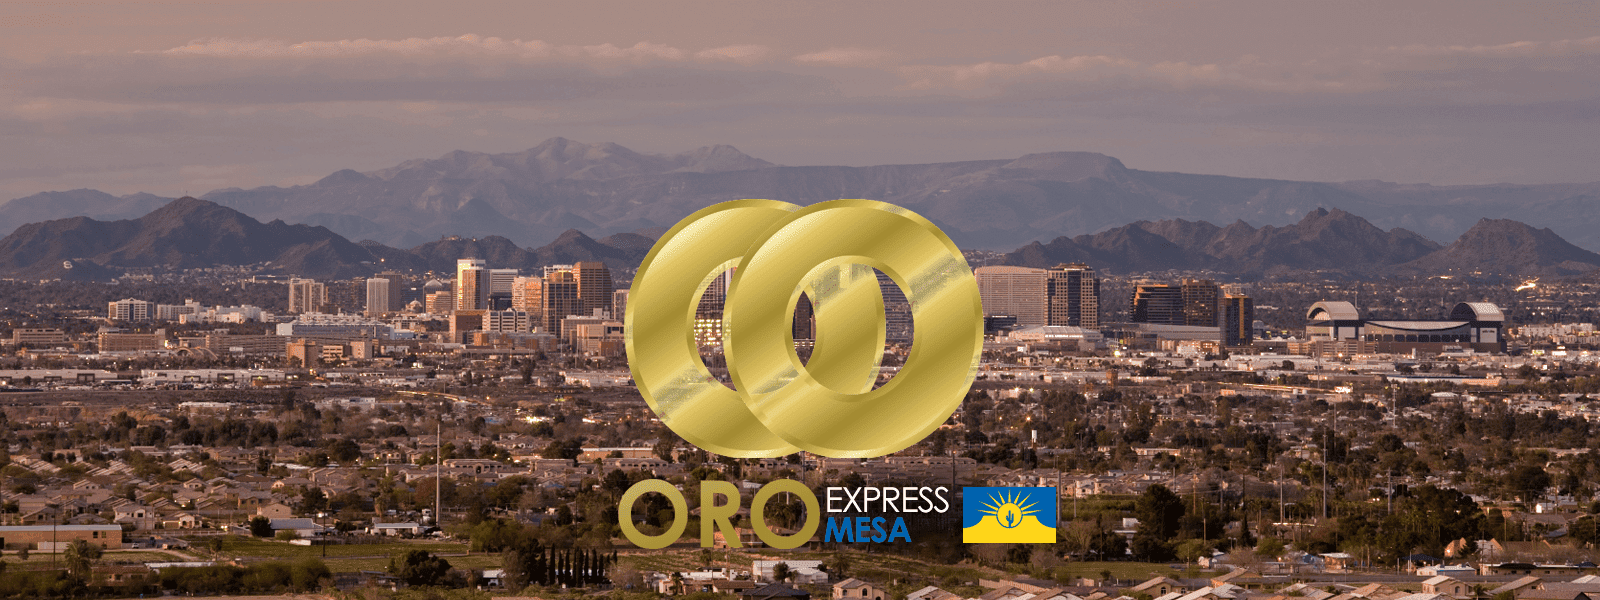 Mesa relies and trusts Oro Express Mesa Pawn and Gold